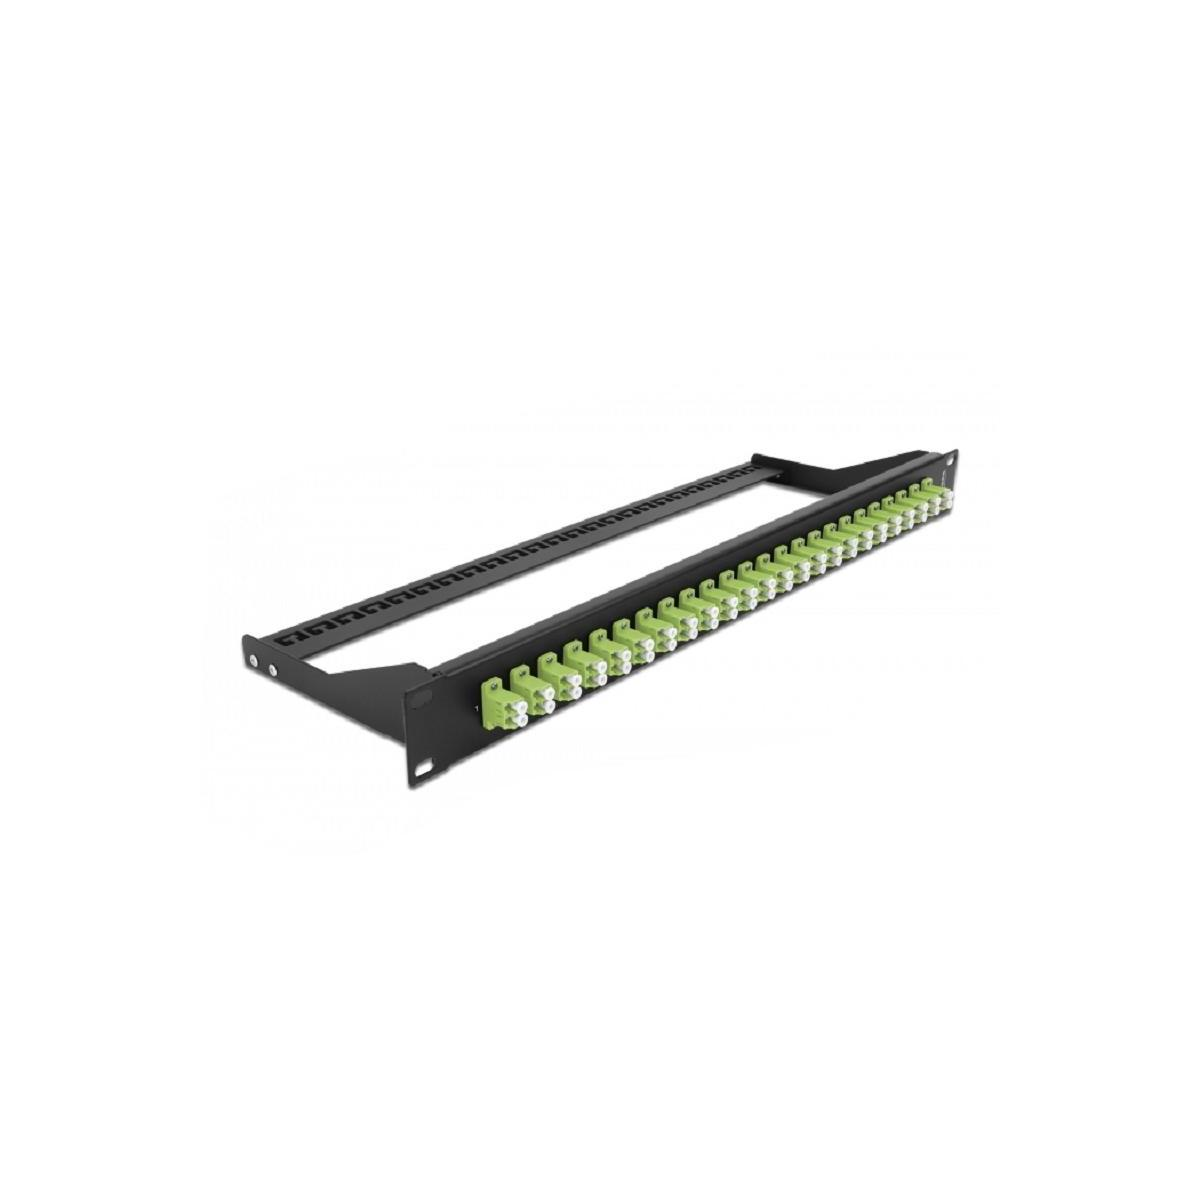 DELOCK Patchpanel 43391